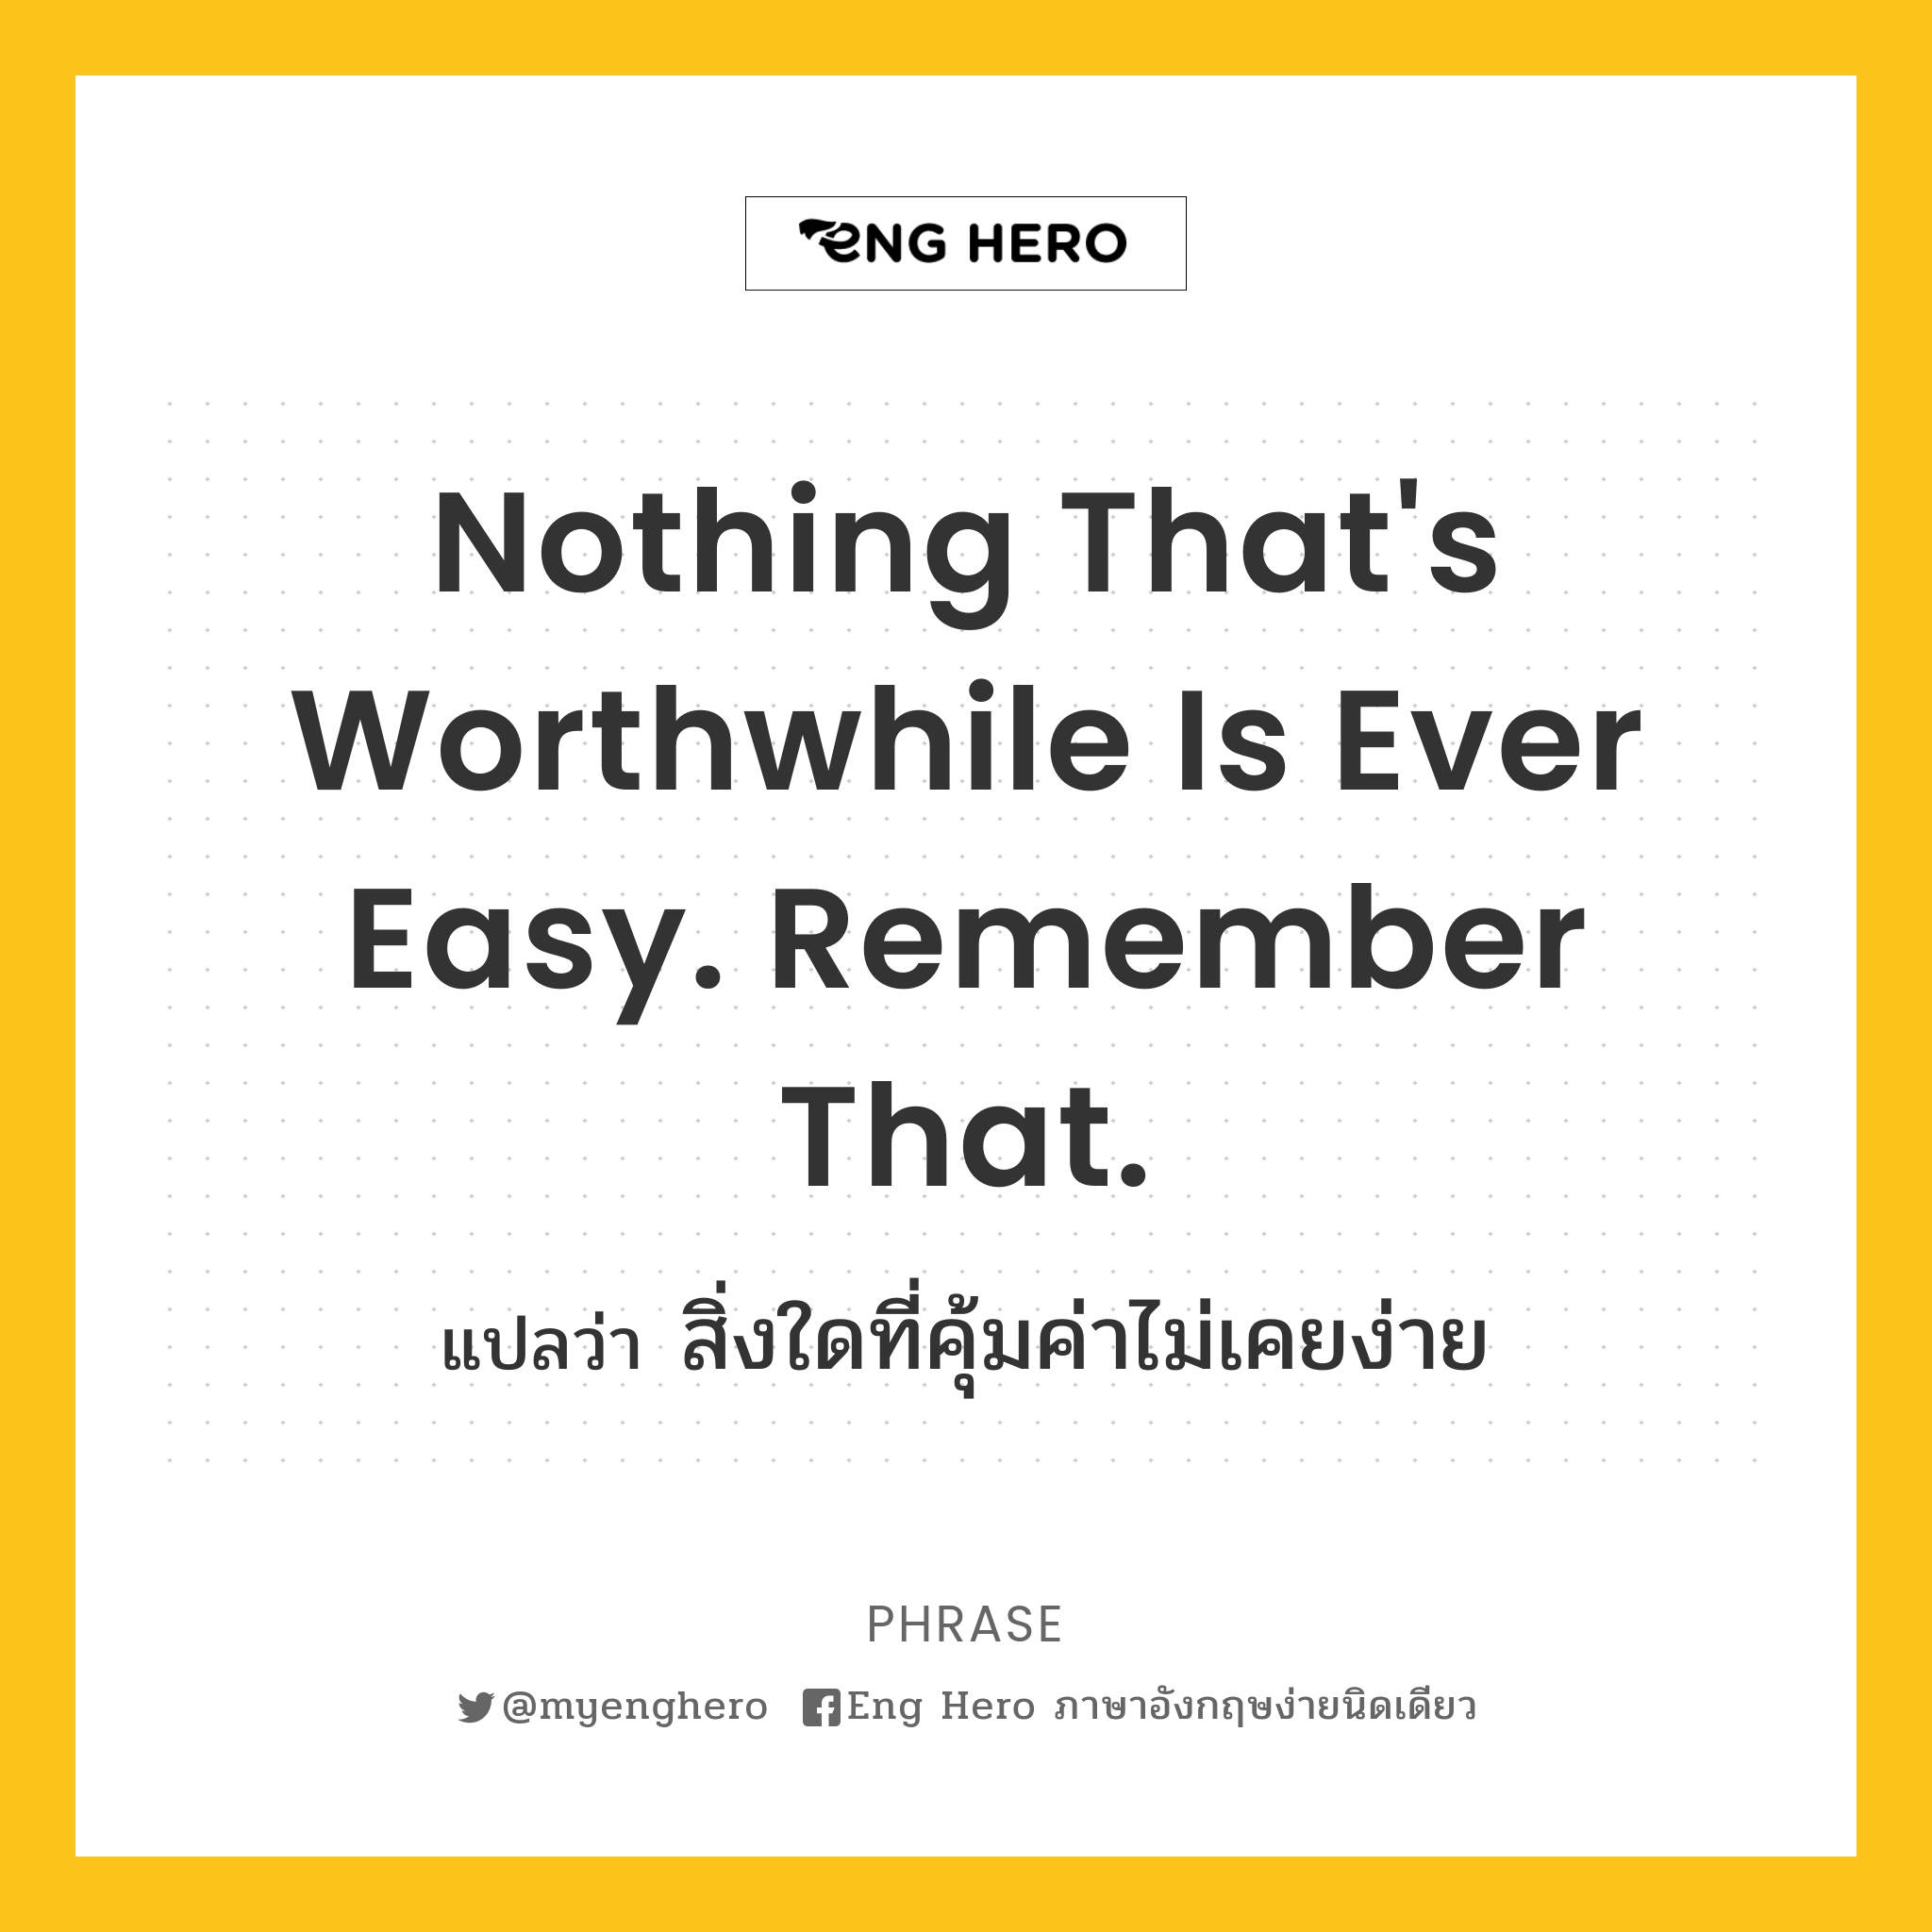 Nothing that's worthwhile is ever easy. Remember that.